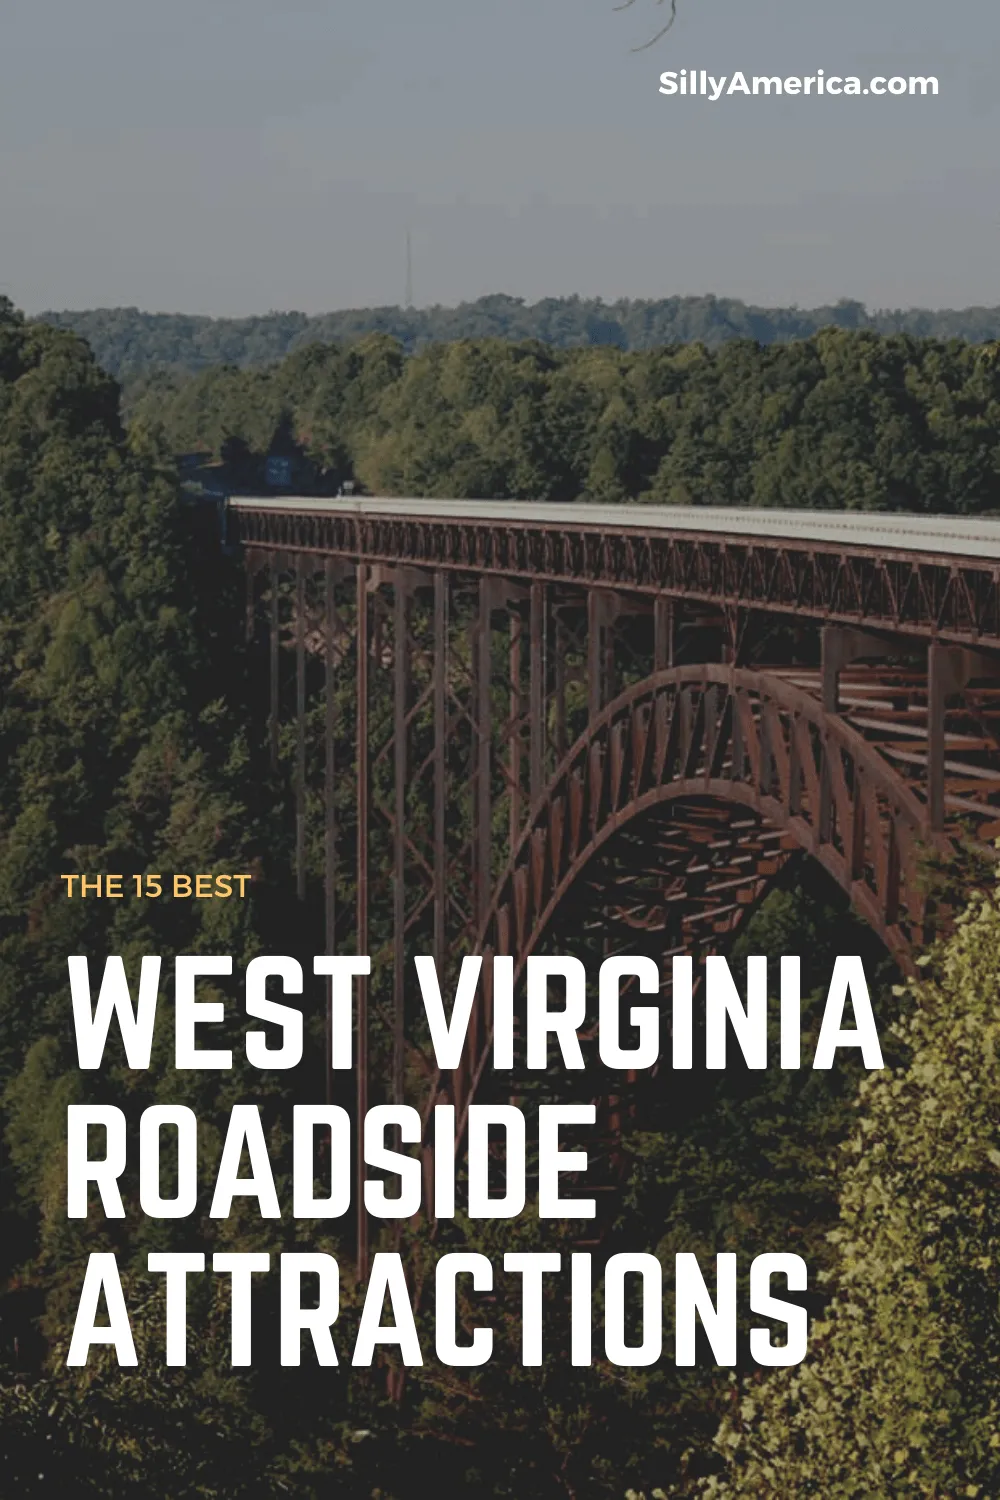 The best West Virginia roadside attractions to visit on a West Virginia road trip. Add these roadside oddities to your travel bucket list or itinerary! Weird roadside attractions and road trip stops for kids or adults. #WestVirginiaRoadsideAttractions #WestVirginiaRoadsideAttraction #RoadsideAttractions #RoadsideAttraction #RoadTrip #WestVirginiaRoadTrip #WestVirginiaTravelRoadTrip #ThingsToDoInWestVirginia #WestVirginiaMountainsRoadTrip #WeirdRoadsideAttractions